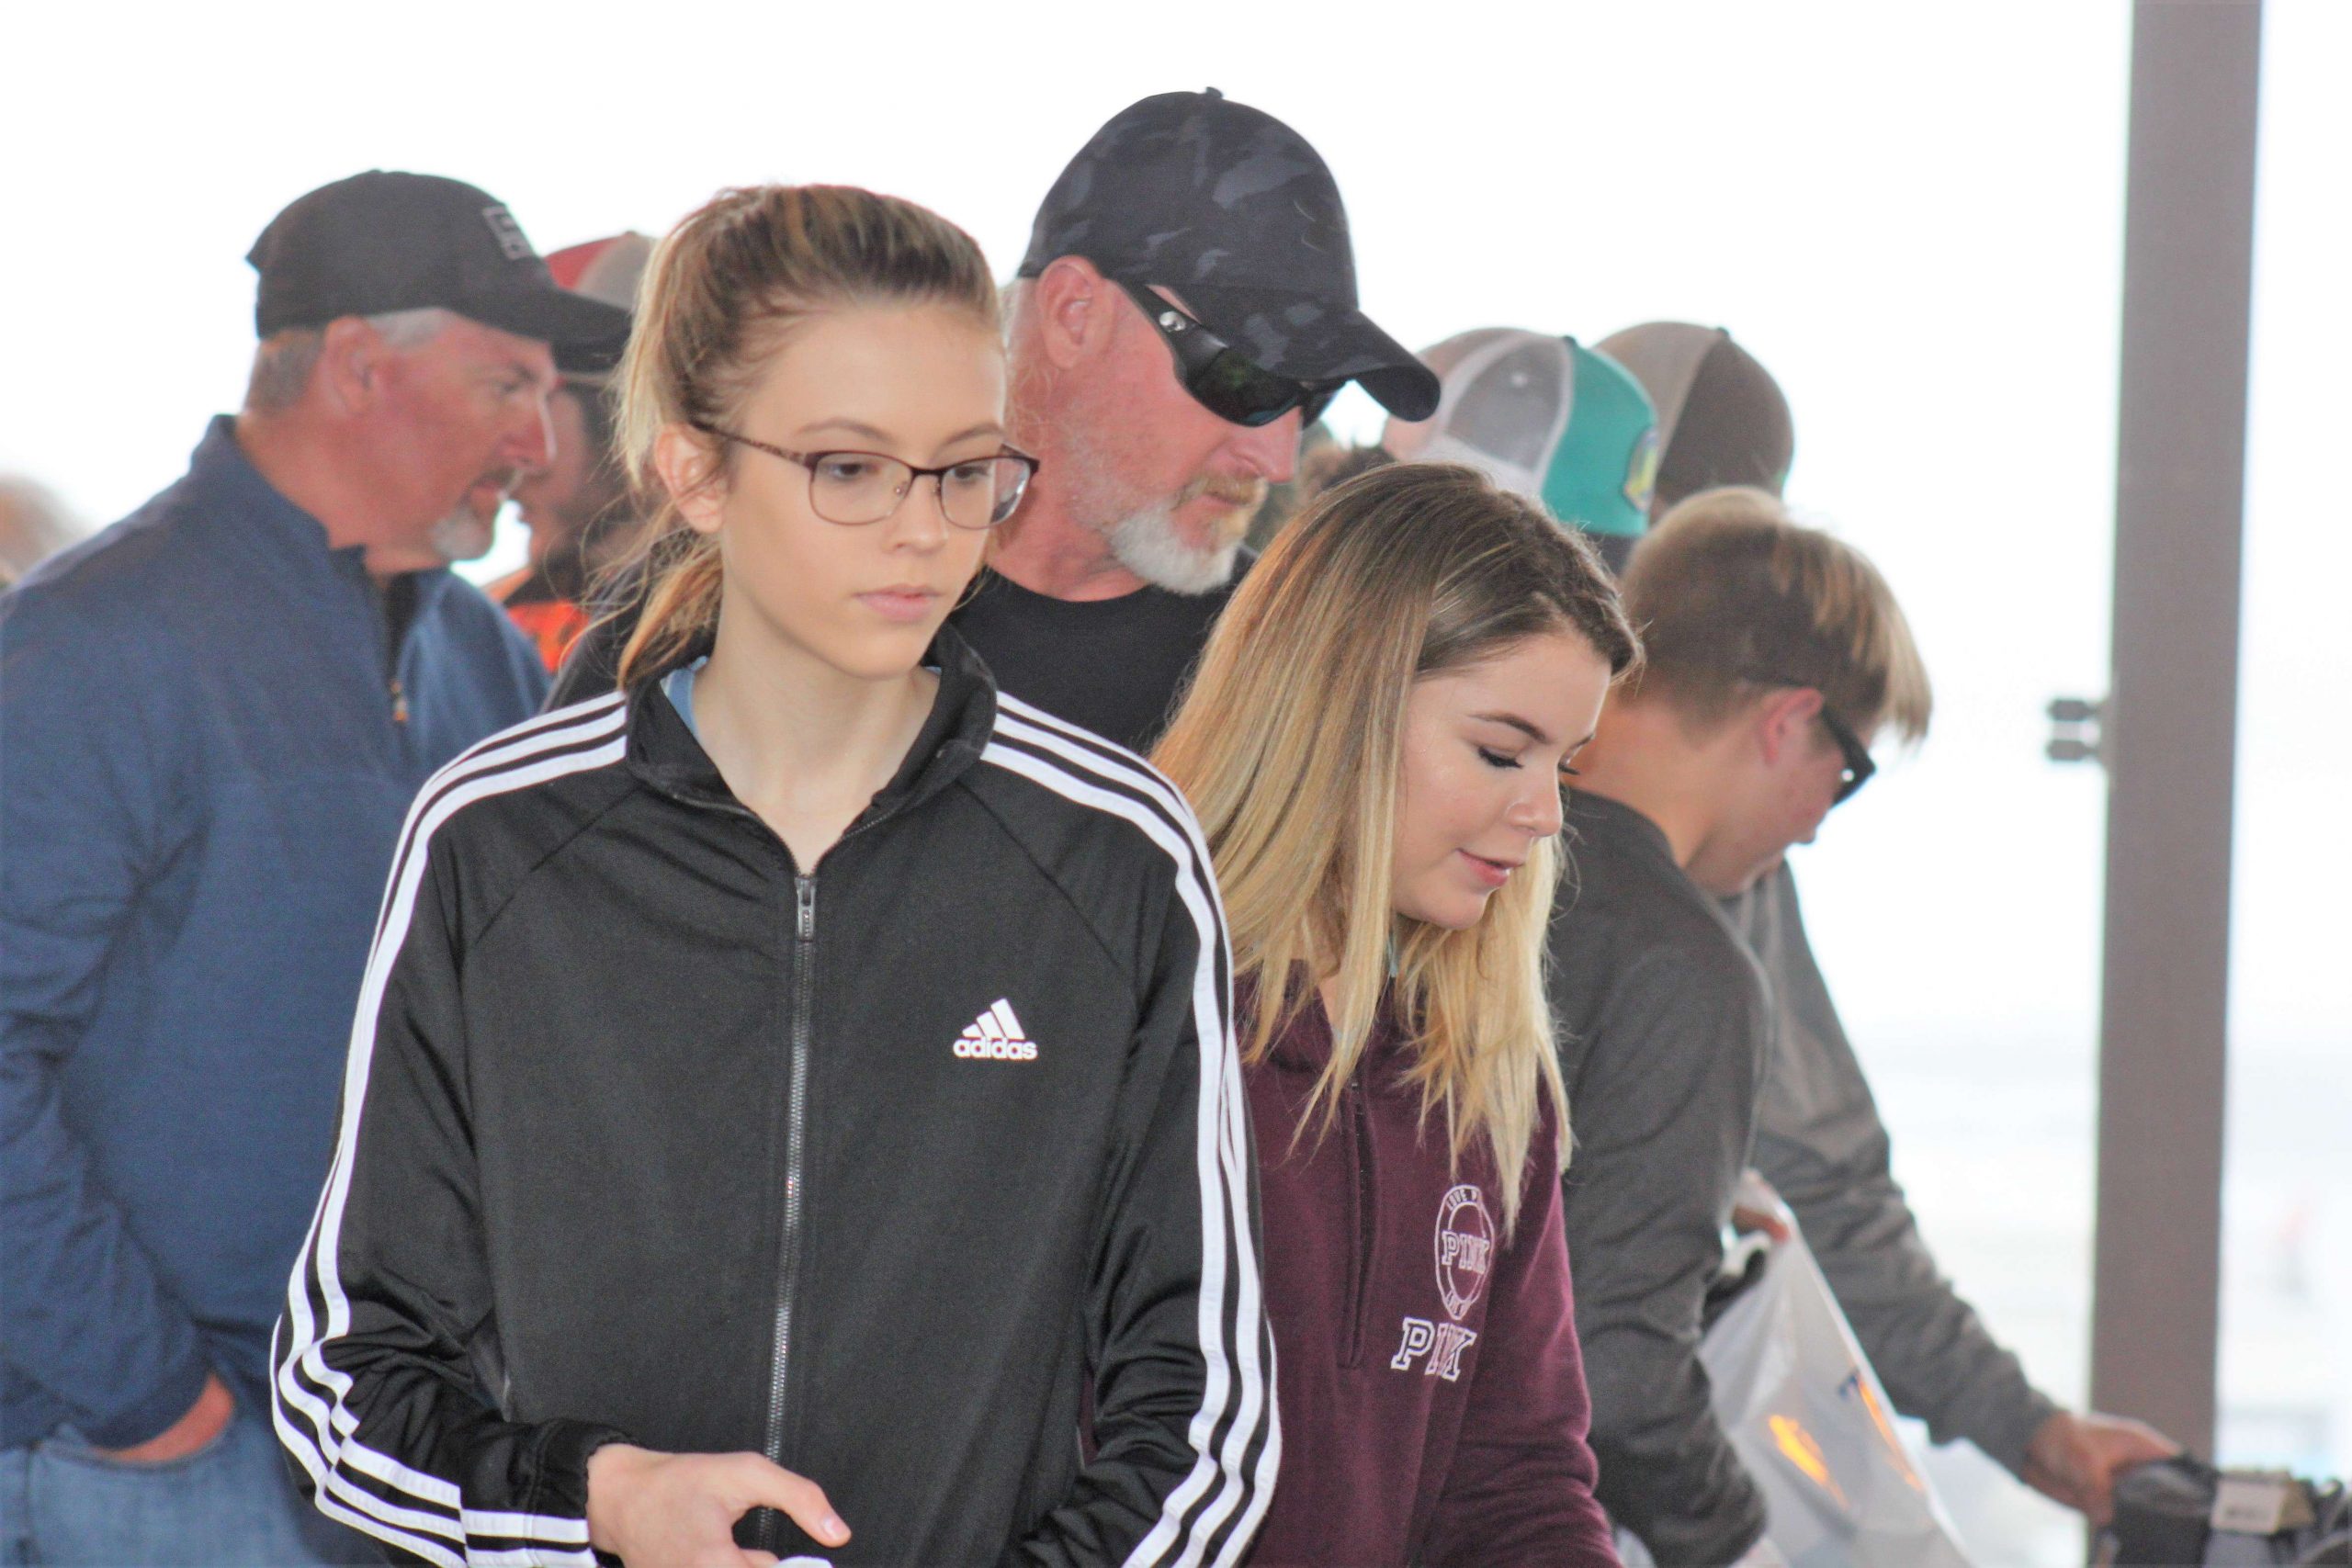 The high school girls are a growing segment of the bass fishing population.